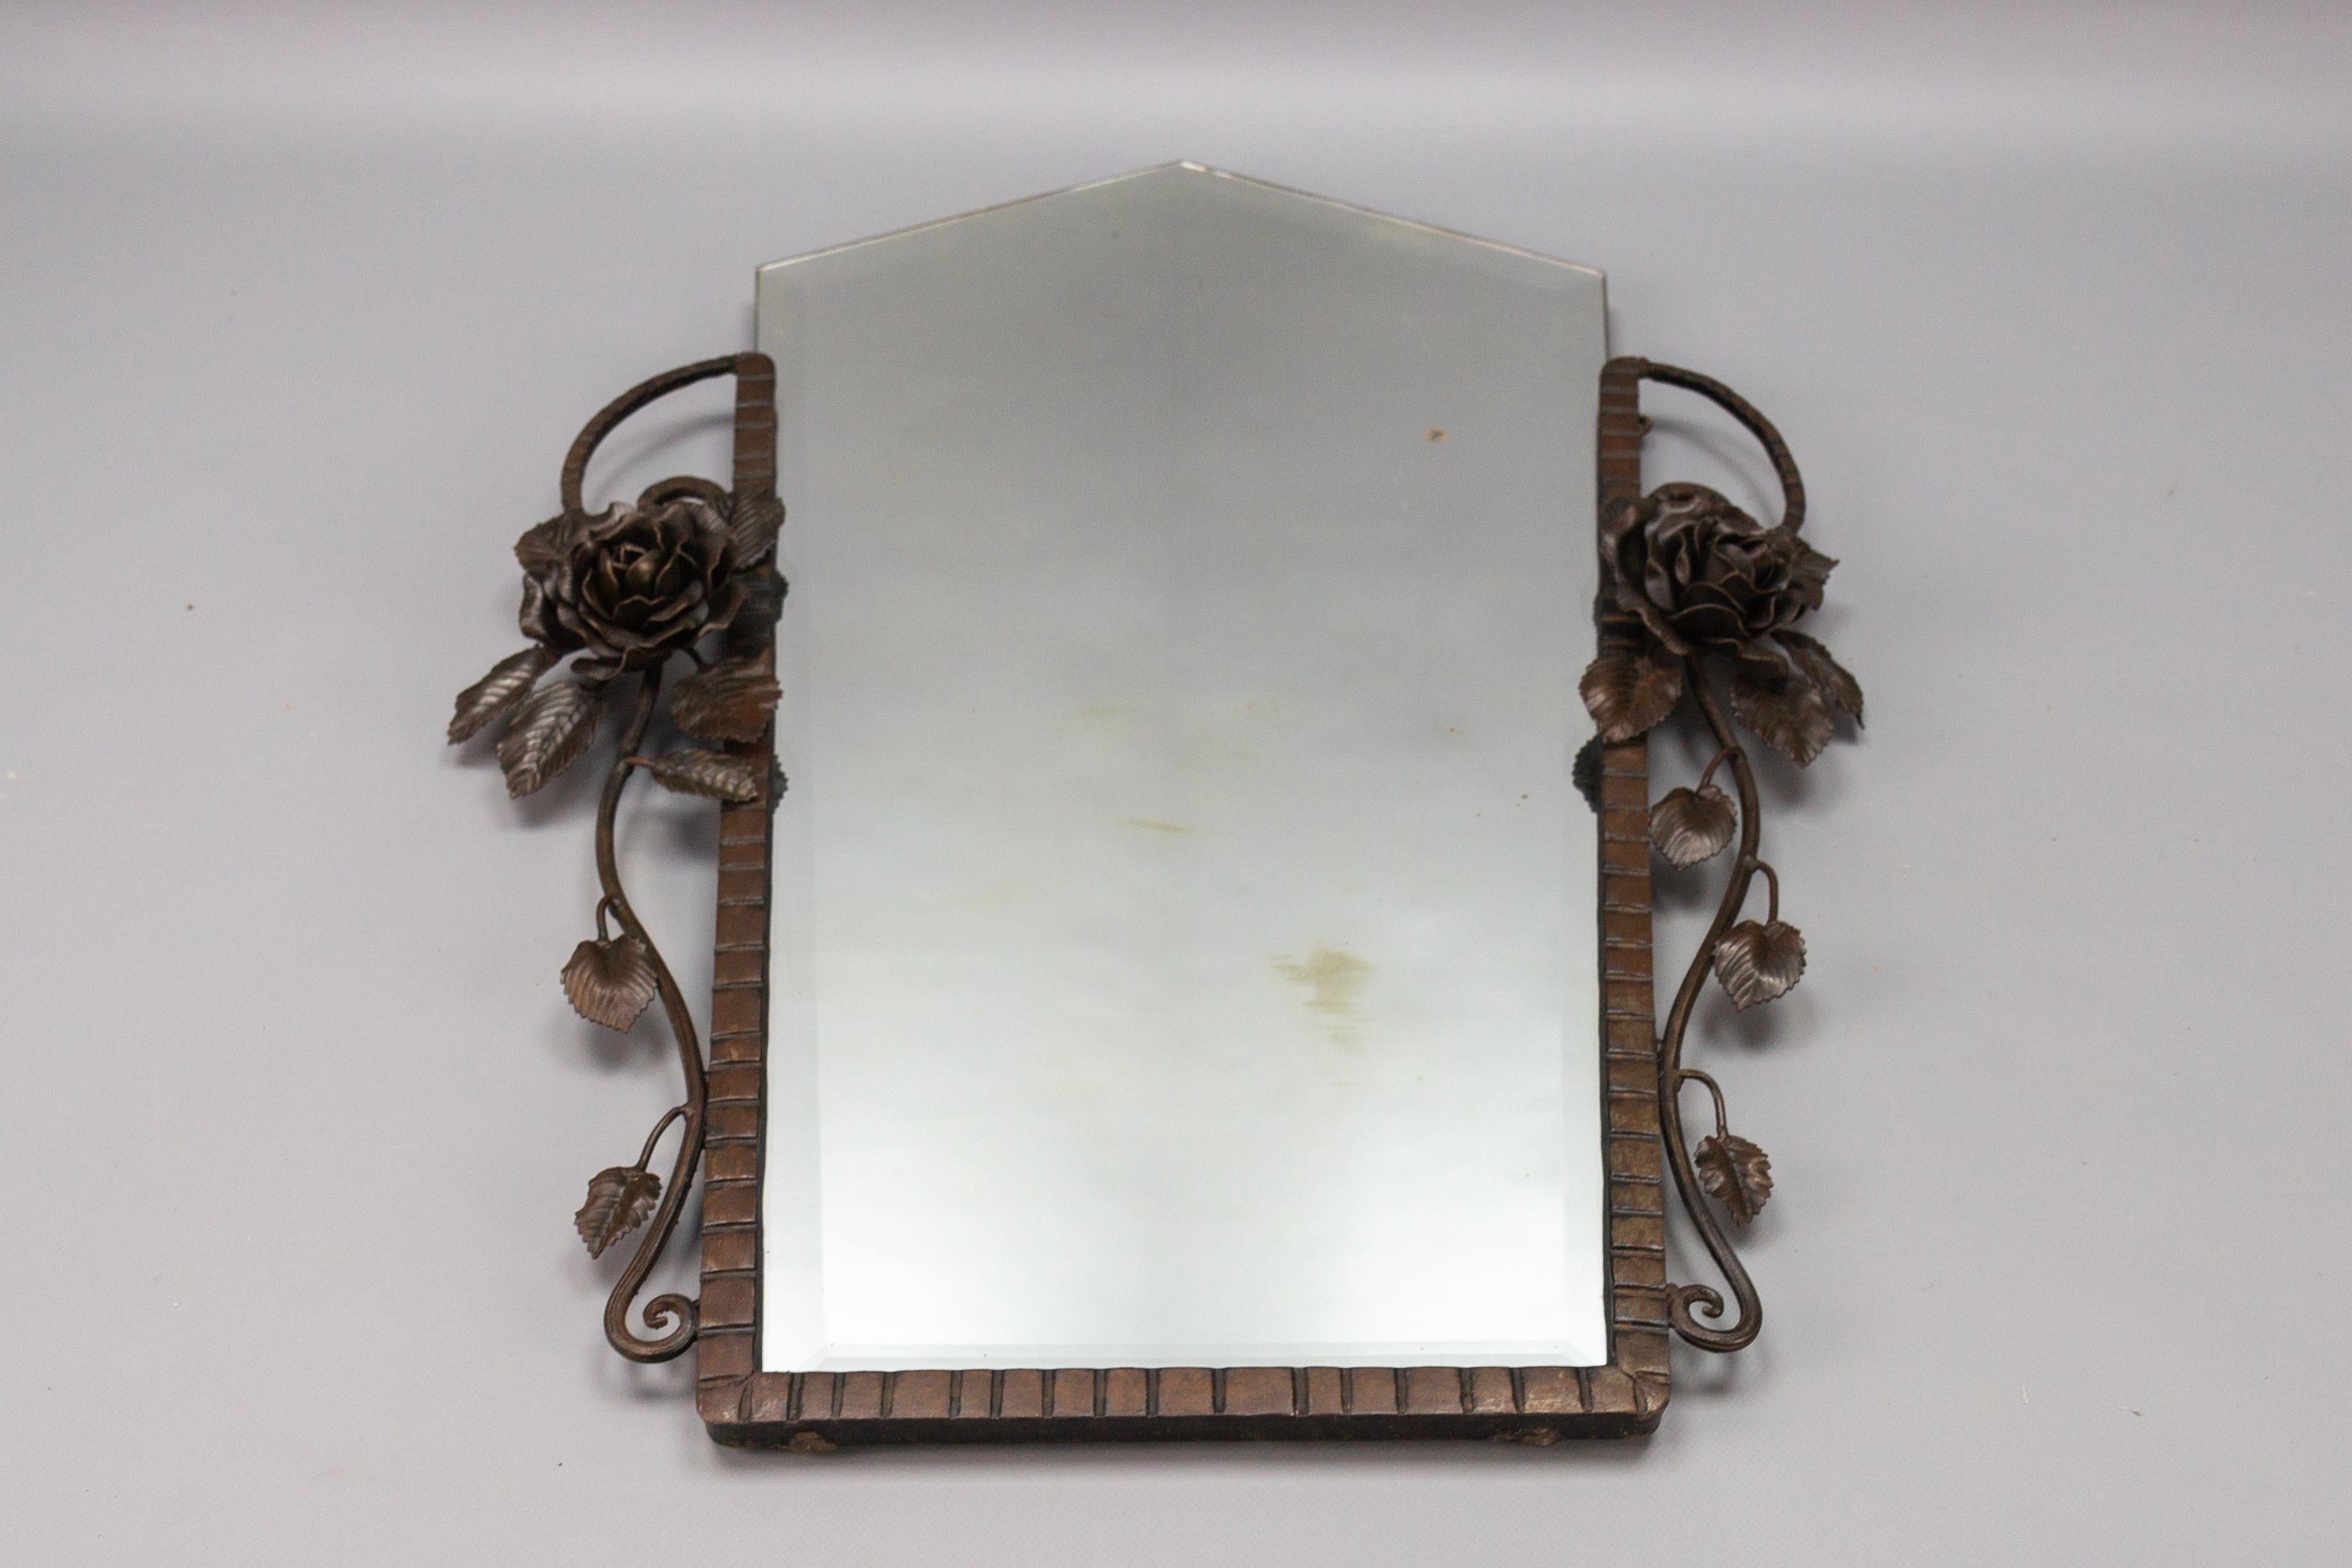 French Art Deco beveled wall mirror with wrought iron frame, decorated with beautiful roses, rose leaves, and scrolls, circa the 1930s.
The fixing chain is present on the backside.
In good and age-appropriate condition. The mirror has signs of aging